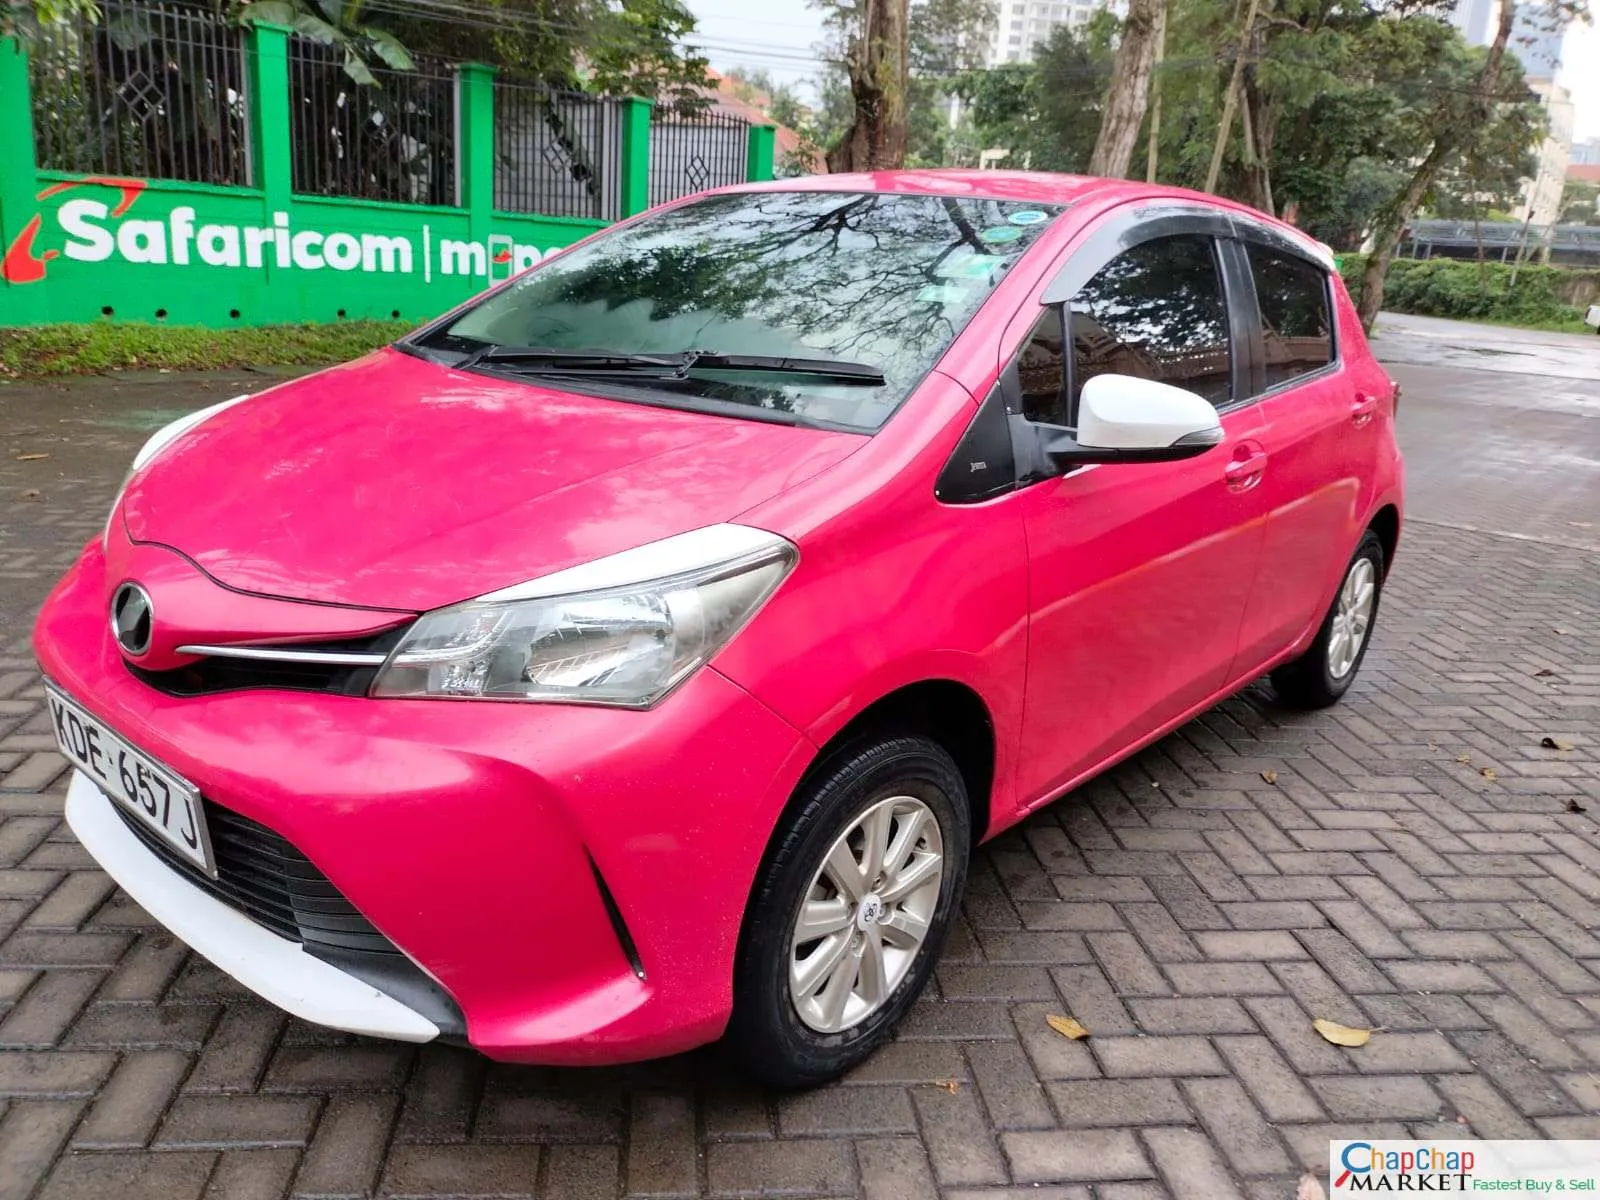 Toyota Vitz jewela 1300cc You Pay 30% Deposit Trade in OK EXCLUSIVE Toyota vitz for sale in kenya hire purchase installments